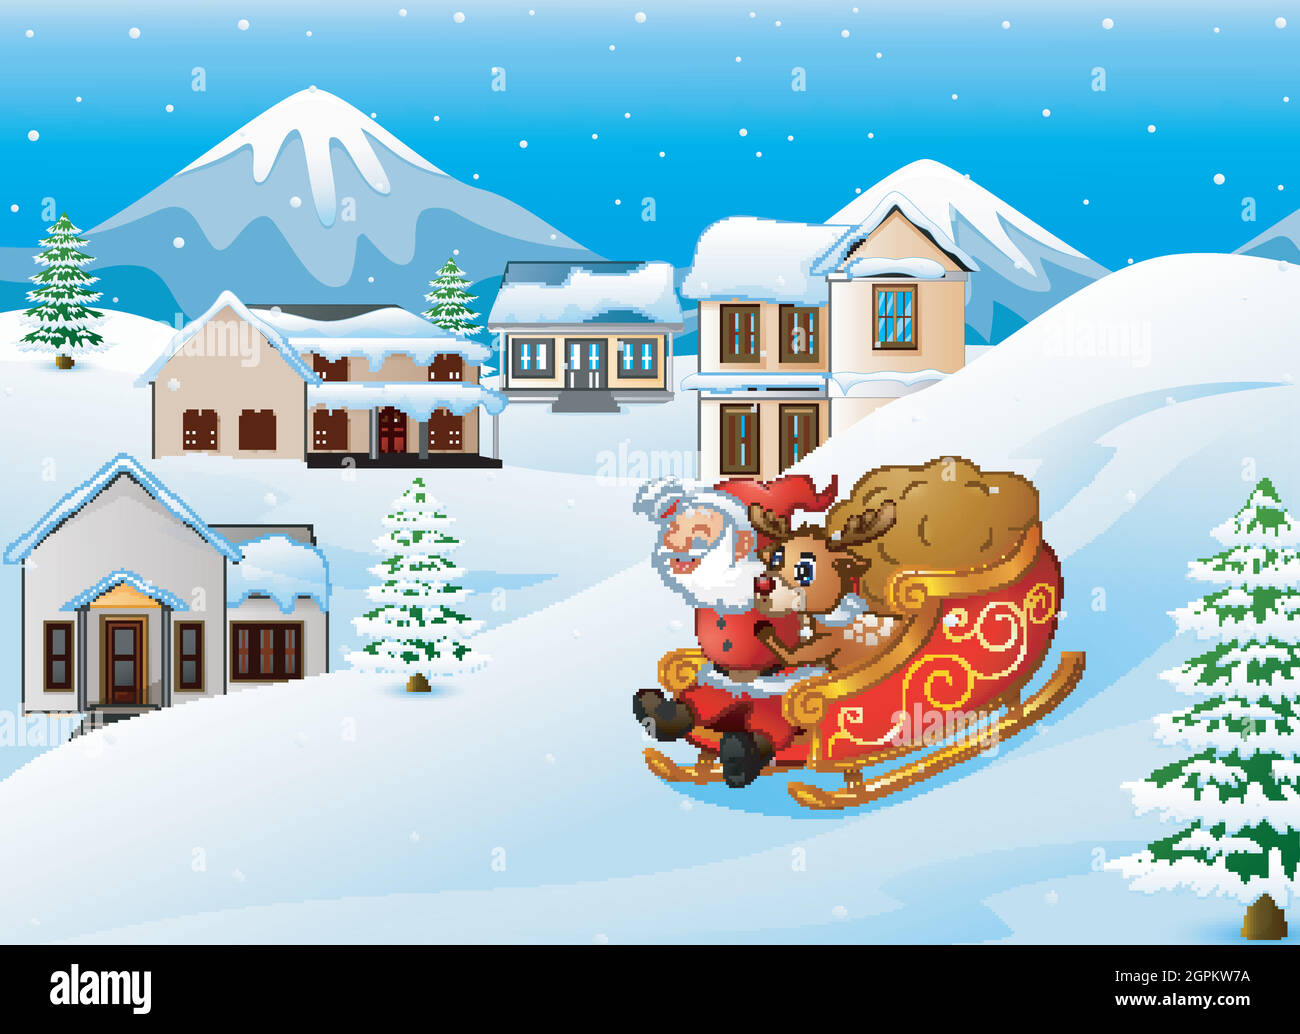 Cartoon santa claus with deer riding on a sleigh with bag of gifts Stock Vector